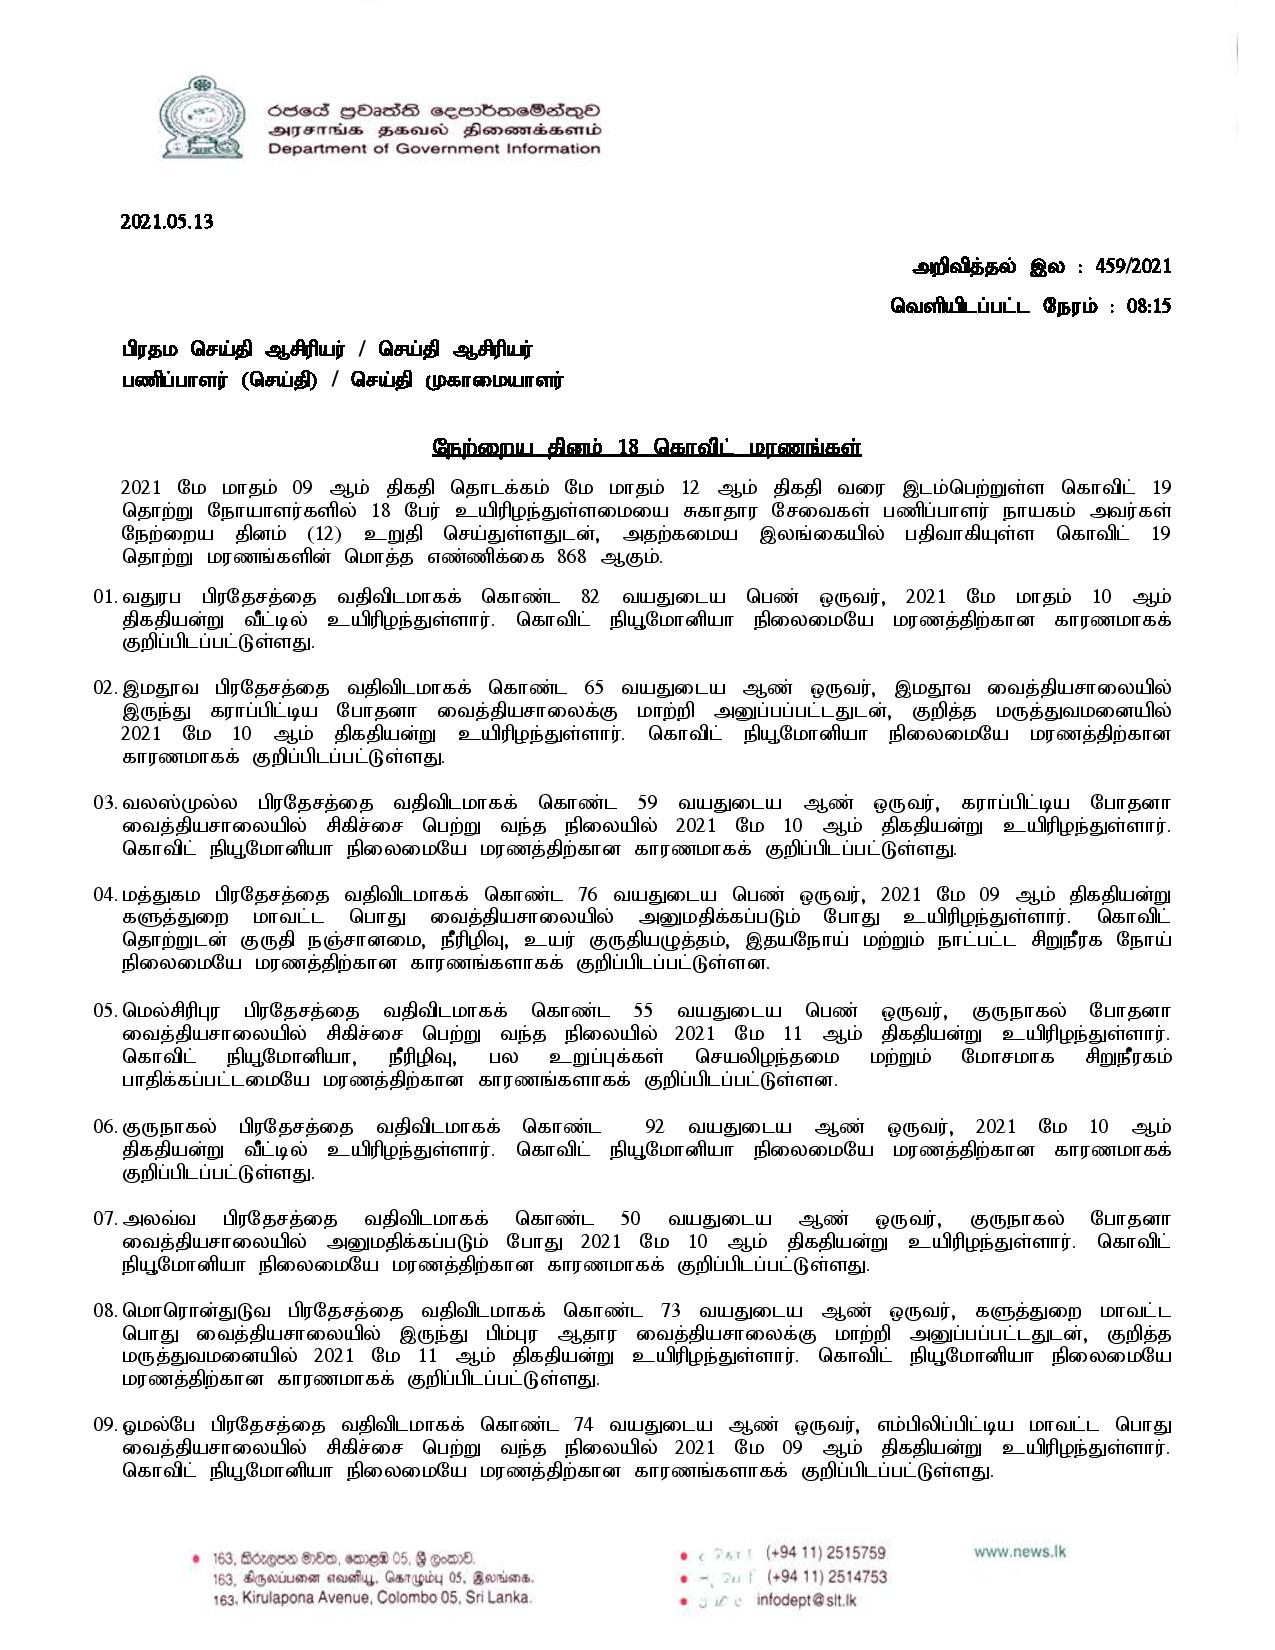 Press Release 459 Tamil page 001